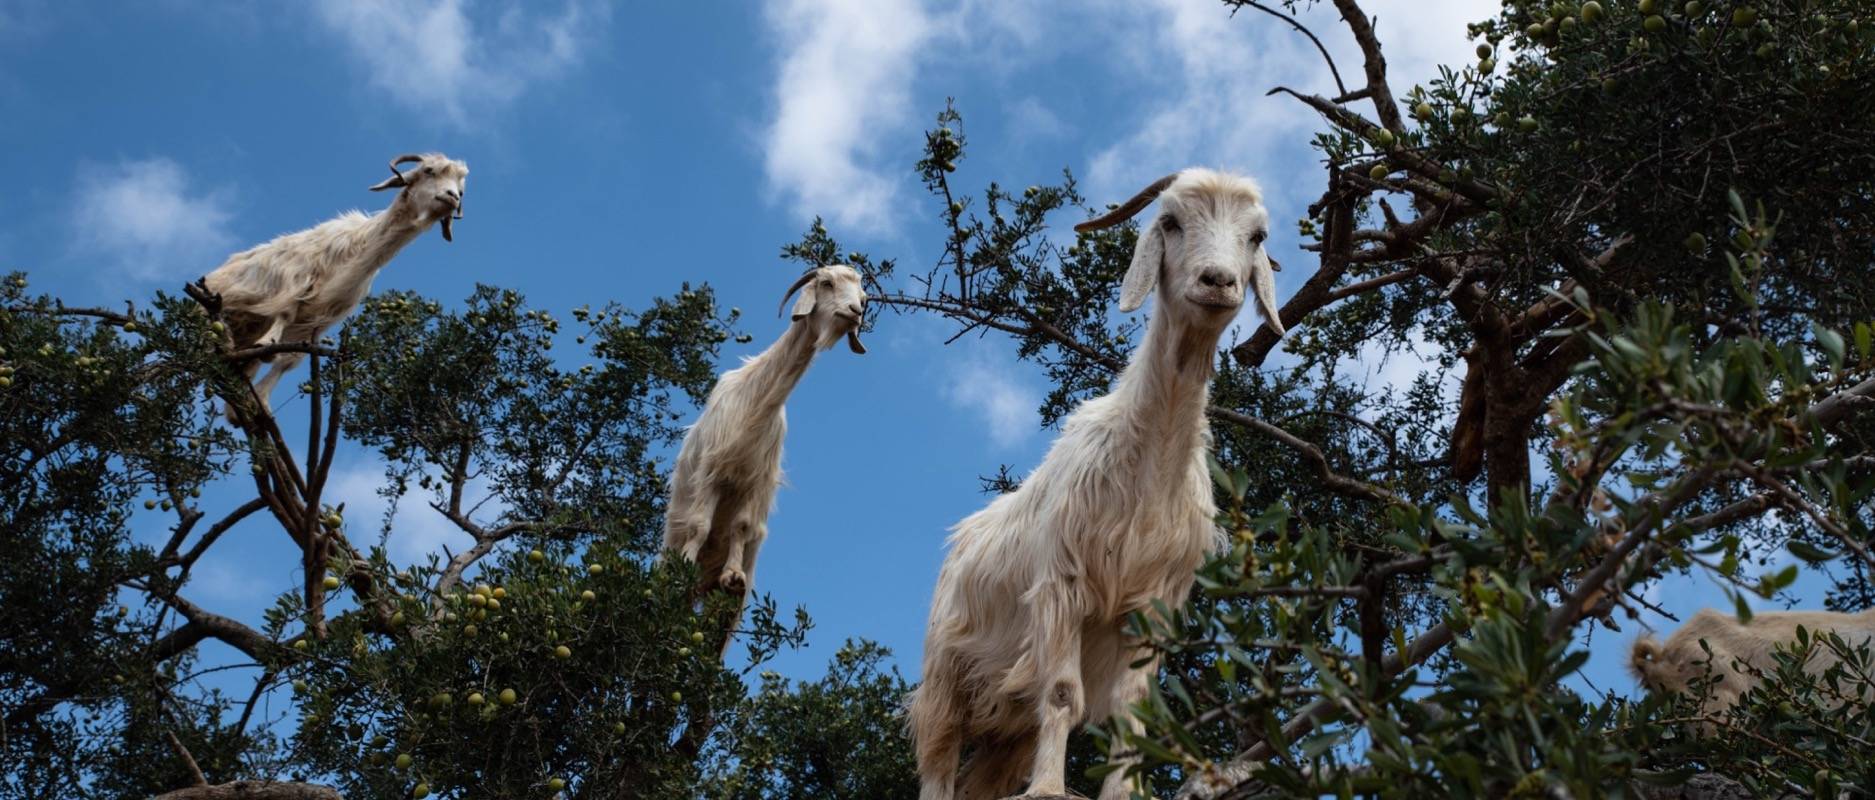 Goats on top of a tree